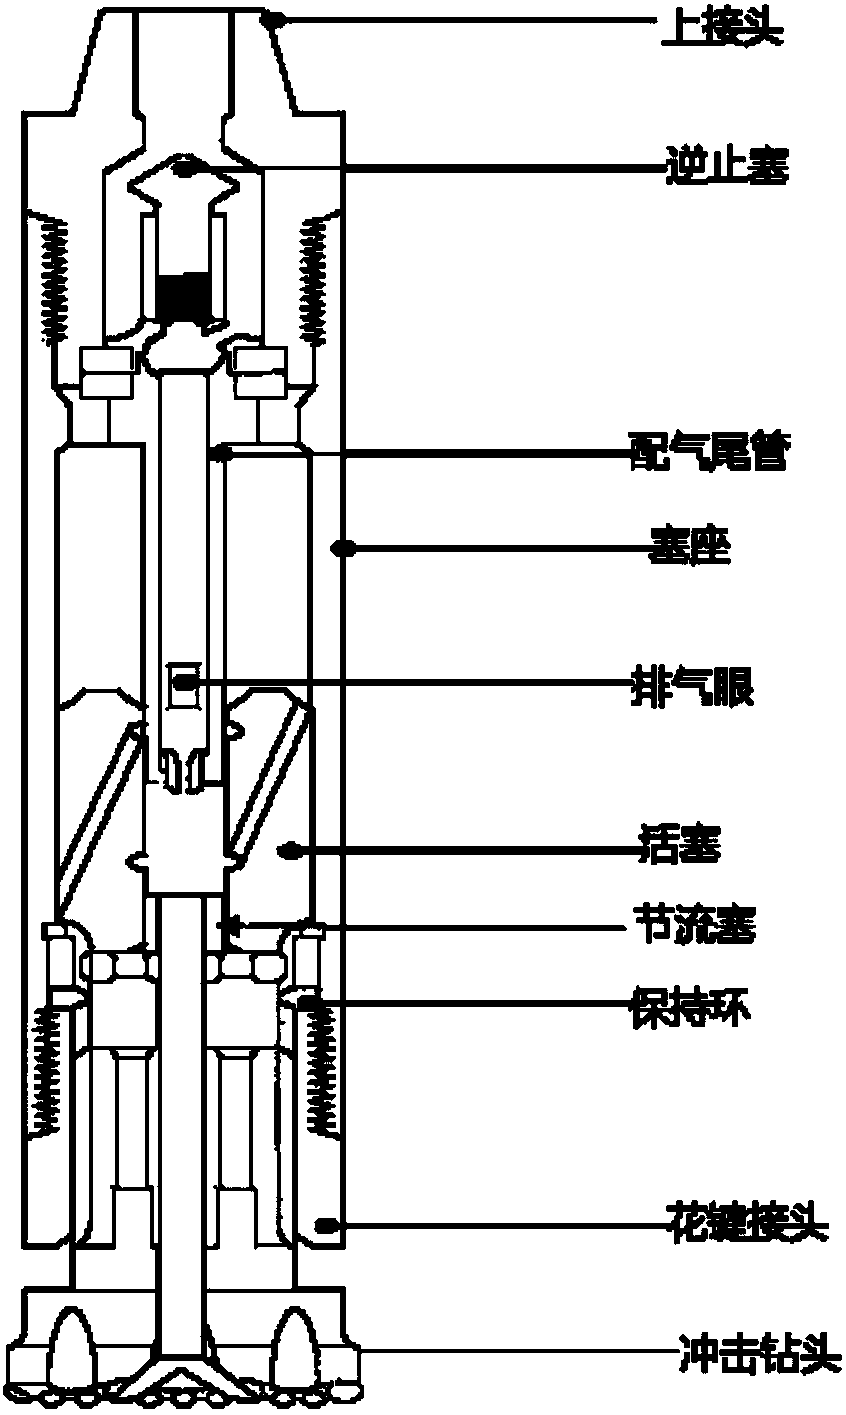 Method and system for calculating mechanical specific energy applied to air hammer drilling